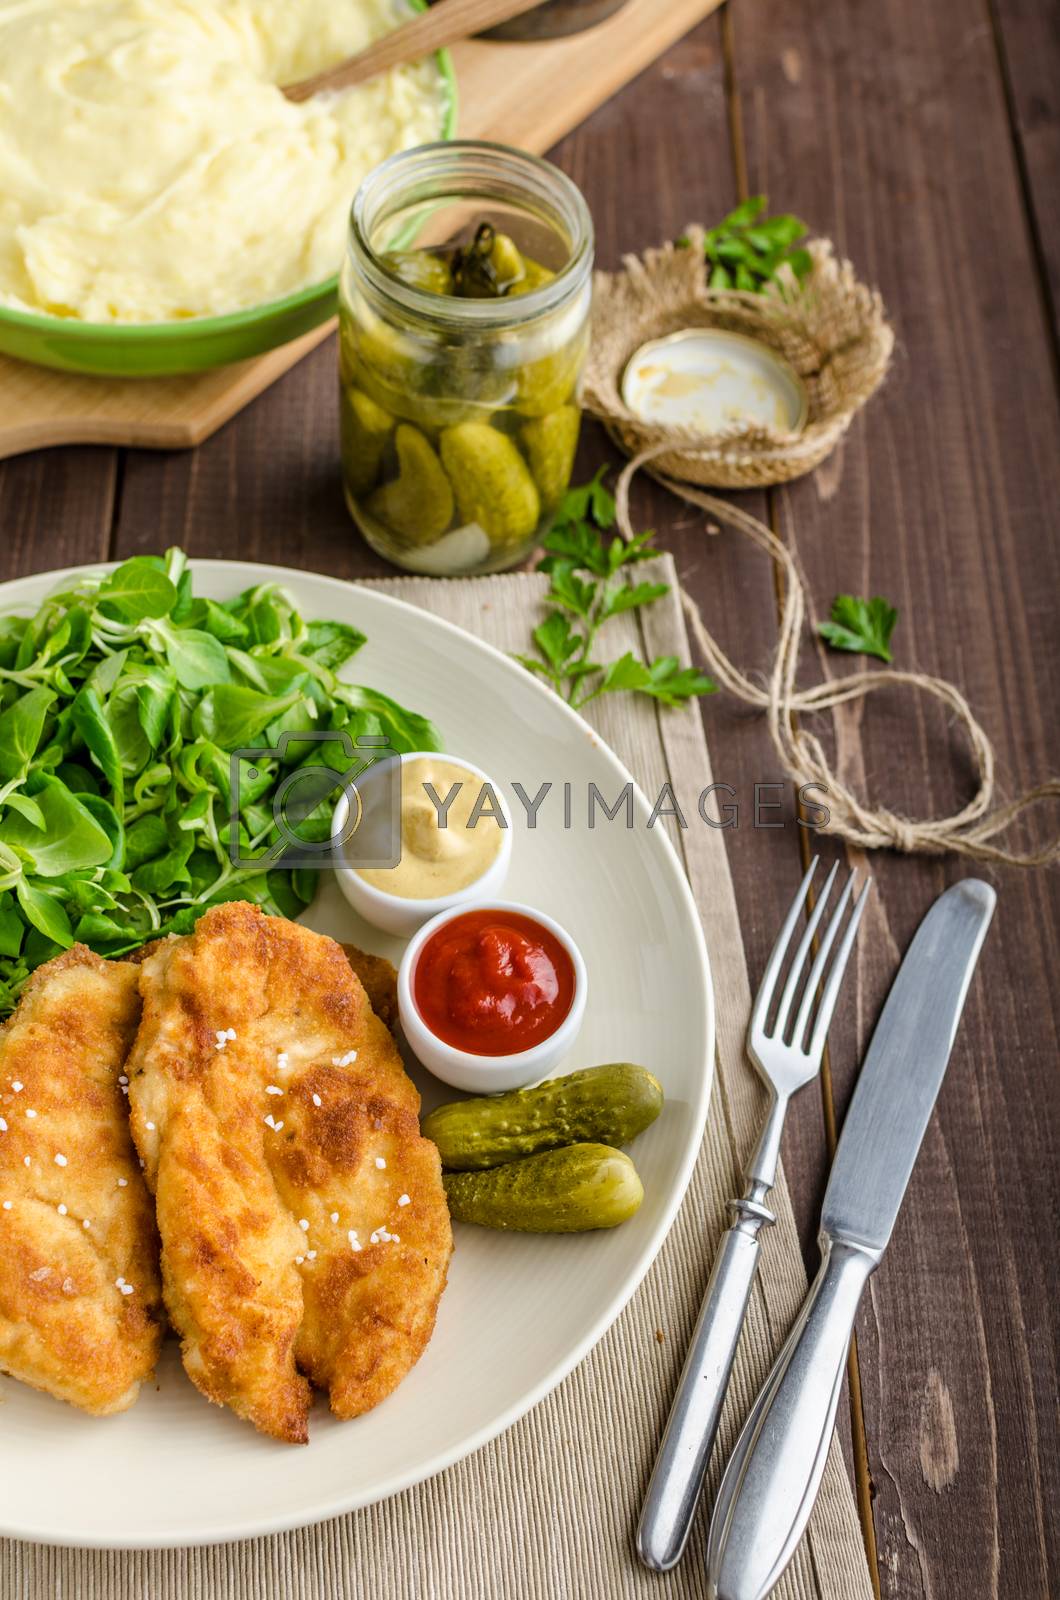 Royalty free image of Schnitzel with mashed potatoes and salad by Peteer